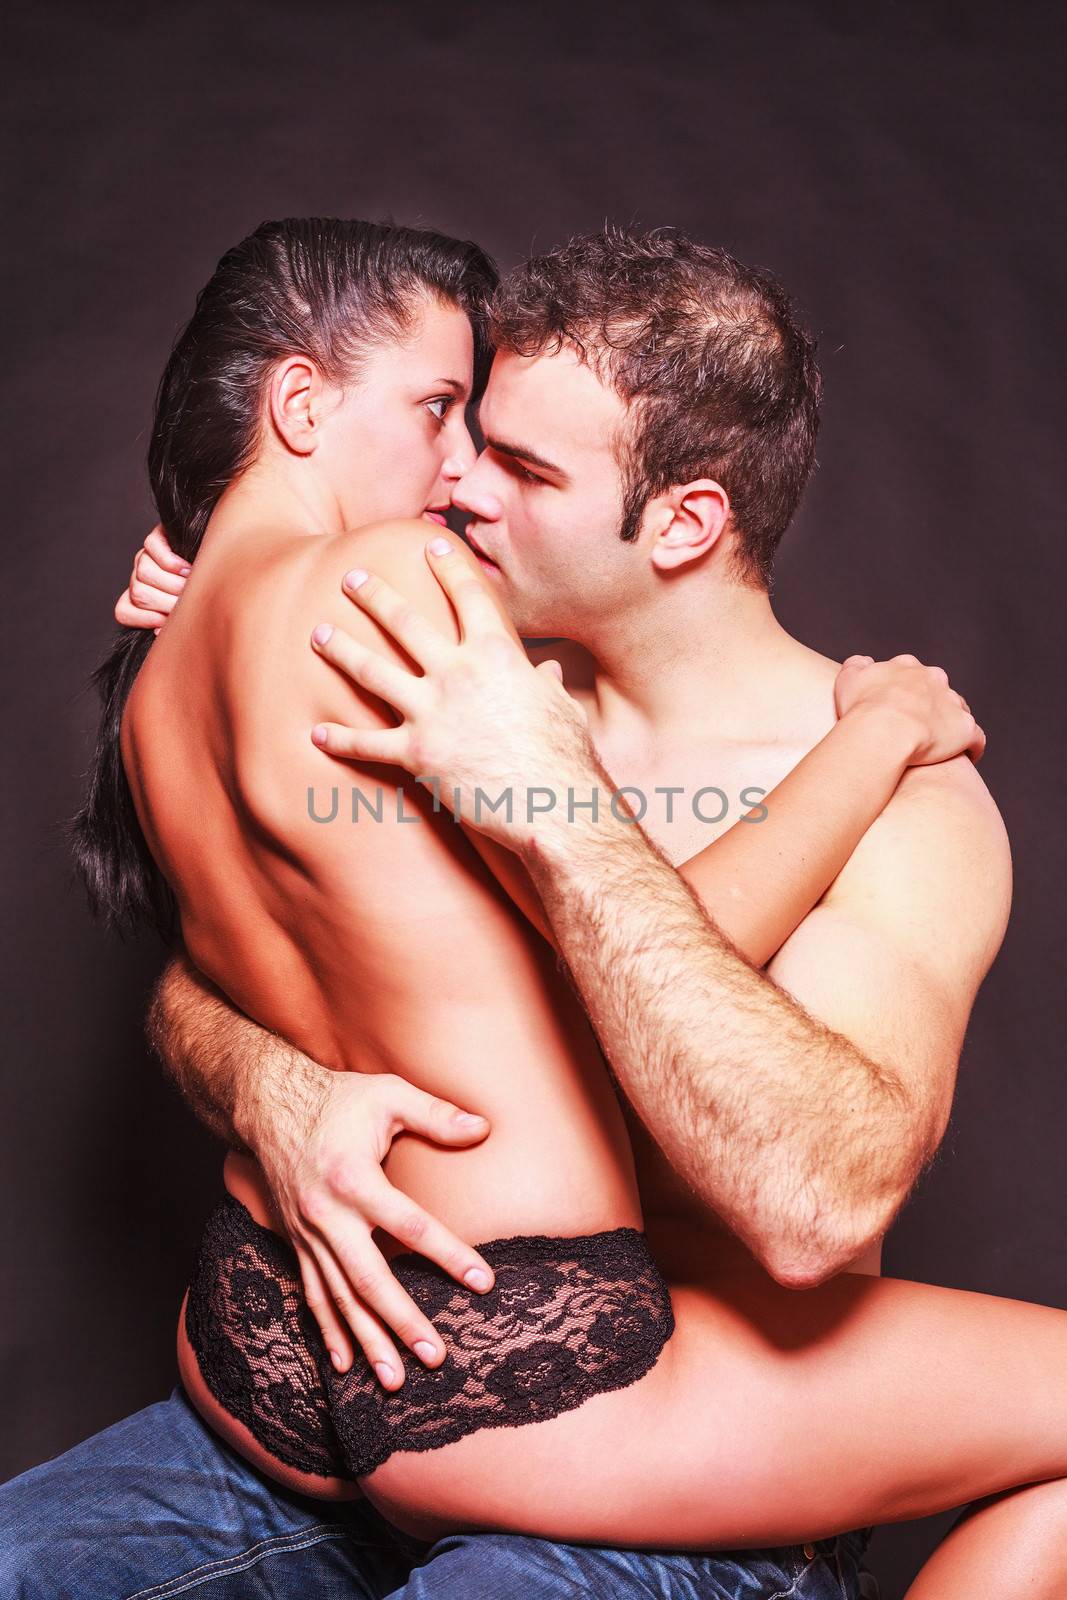 Romantic couple in a suggestive erotic pose with the woman sitting on the mans lap in her panties indulging in passionate foreplay,